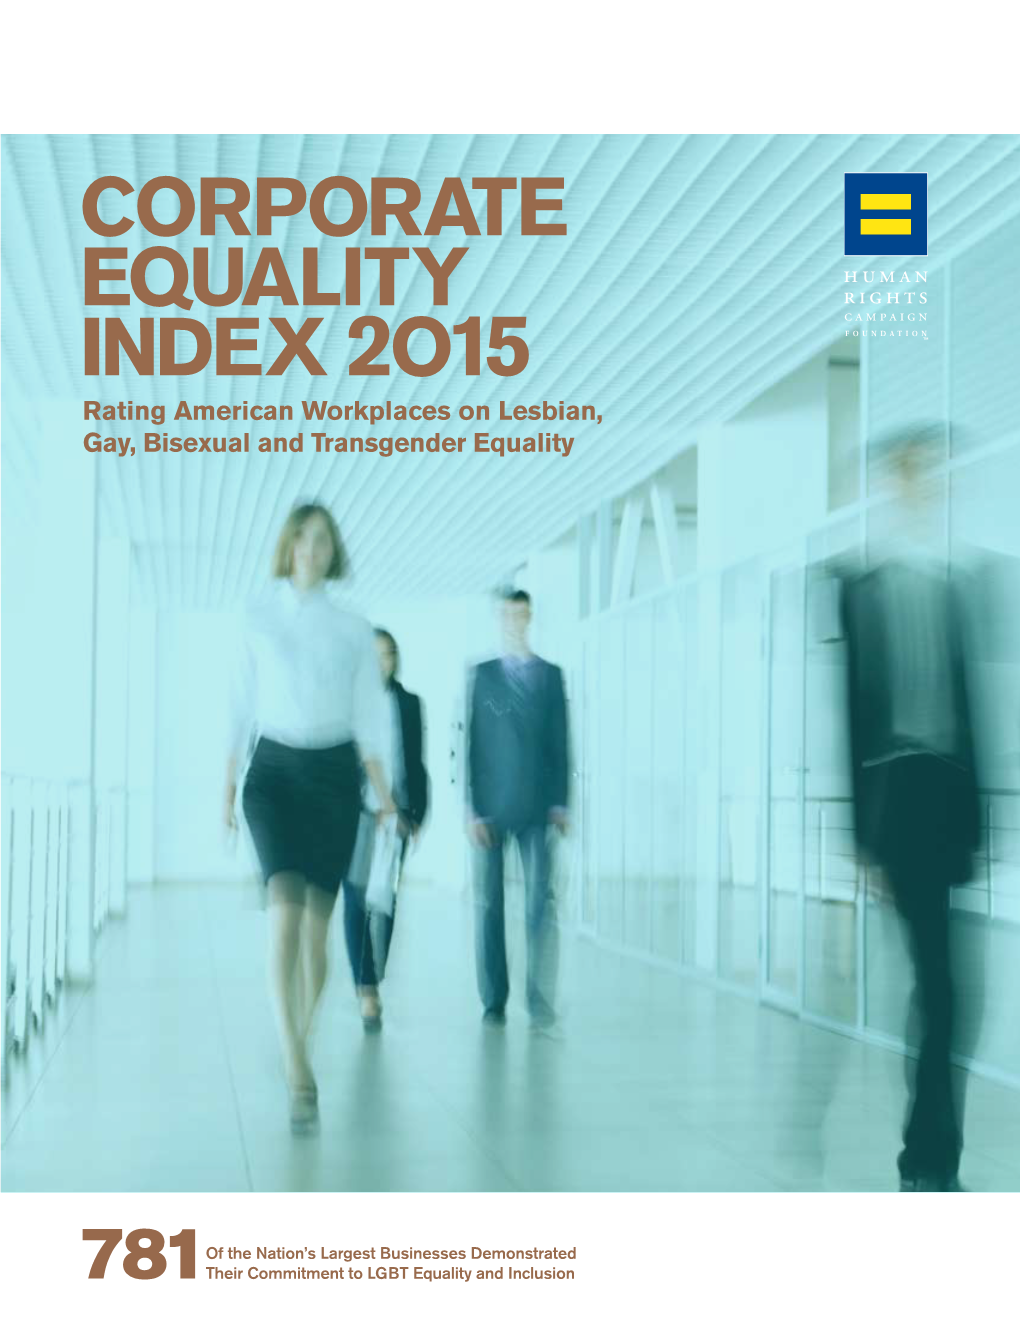 CORPORATE EQUALITY INDEX 2O15 Rating American Workplaces on Lesbian, Gay, Bisexual and Transgender Equality